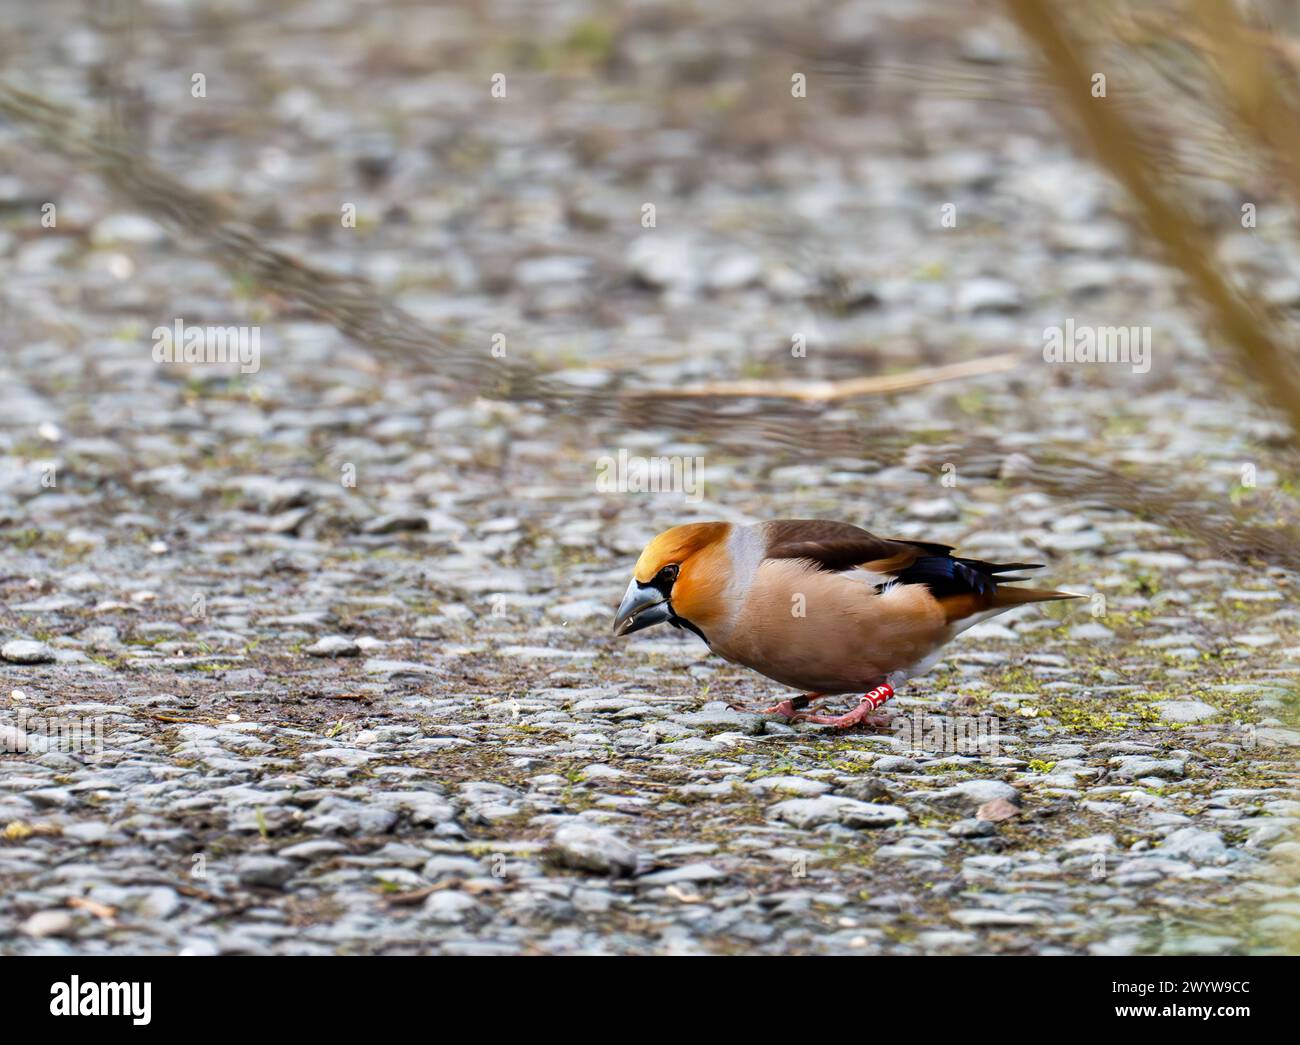 Hawfinch, Coccothraustes coccothraustes, at Sizergh Castle near Kendal, Cumbria, UK. Stock Photo